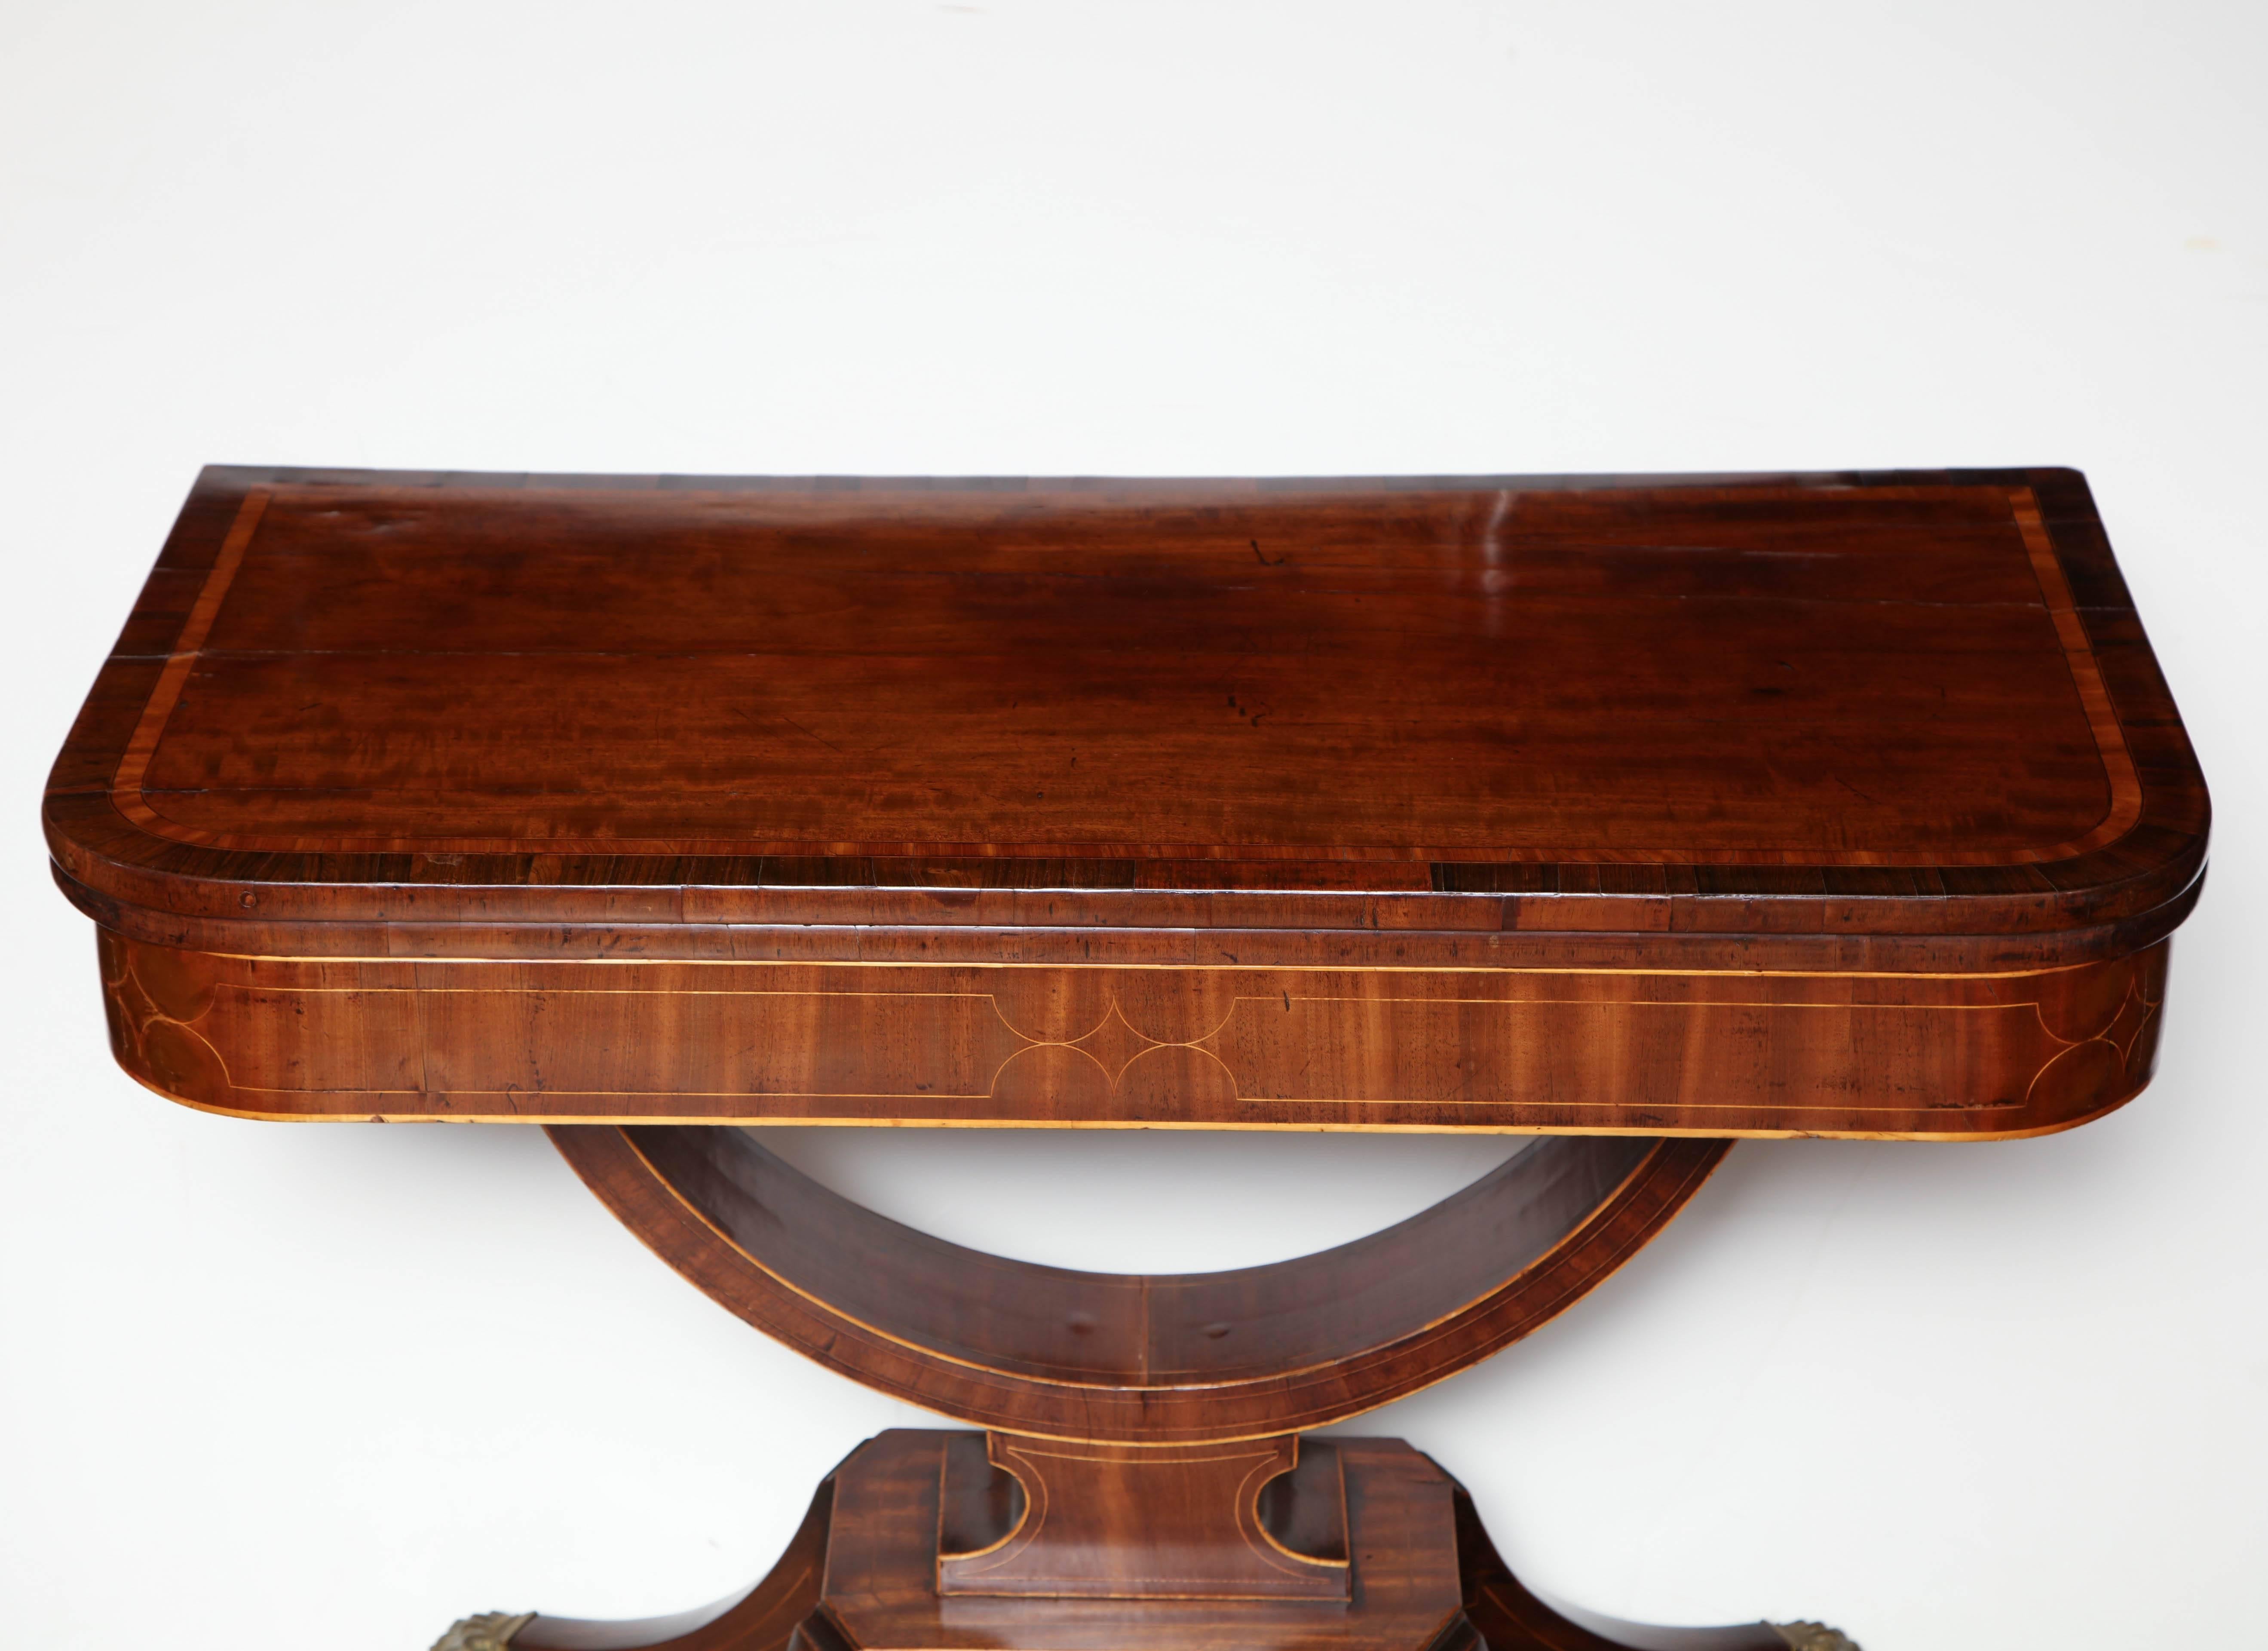 Pair of English Regency rosewood inlaid fold over crad tables wirth out-swept leg pedestal base and paw foot caster feet.